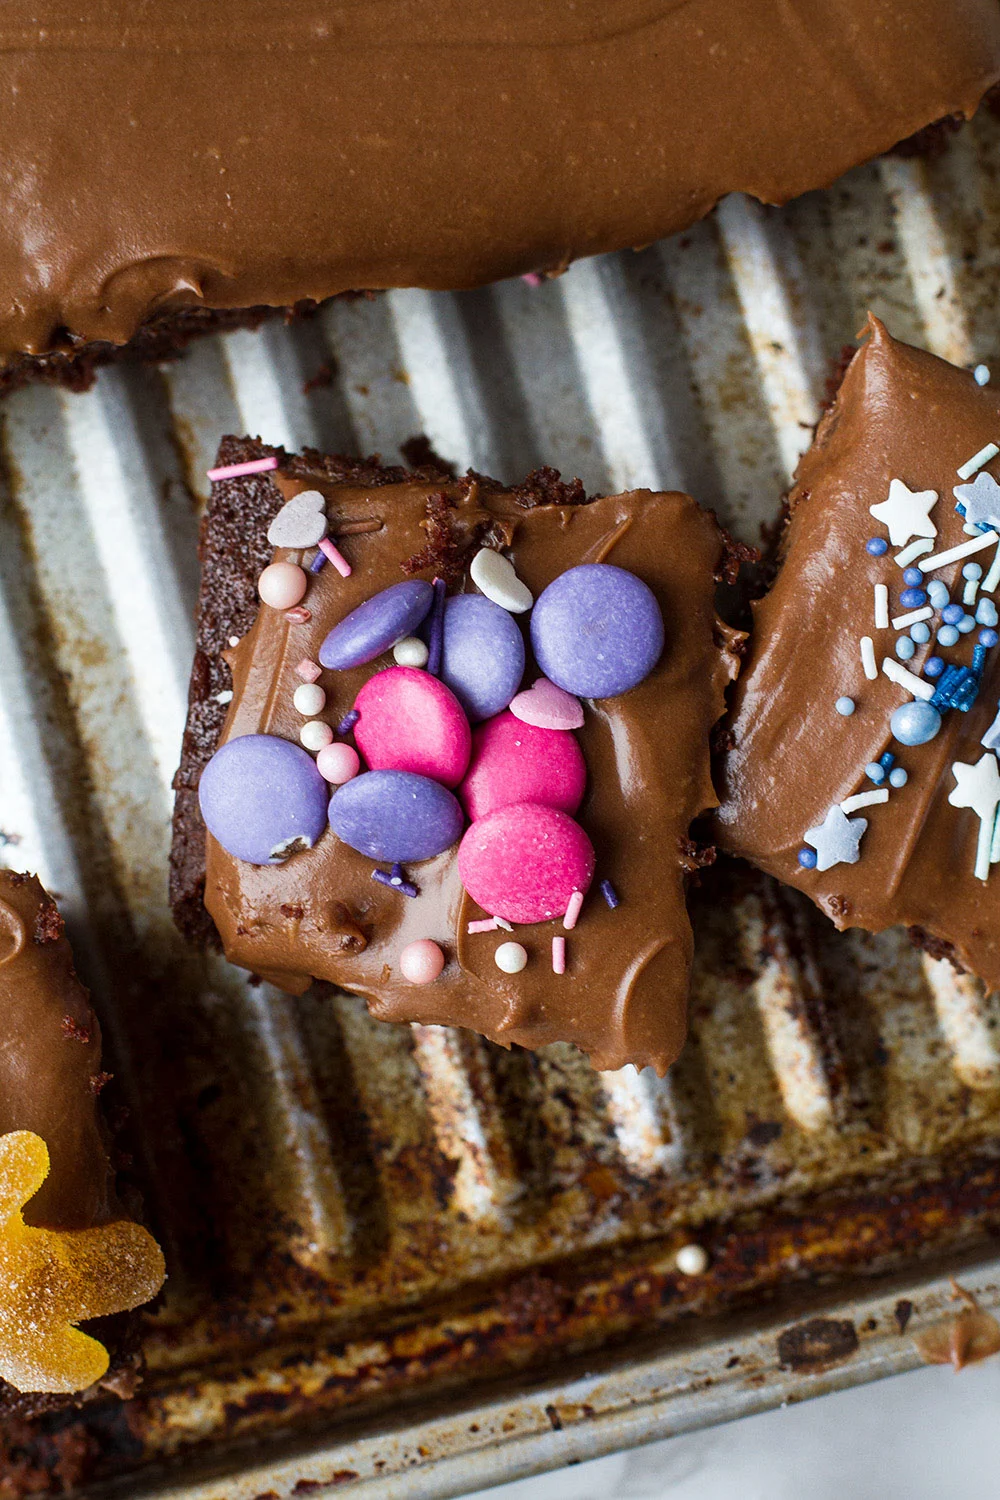 Chocolate cake topped with pink Smarties.